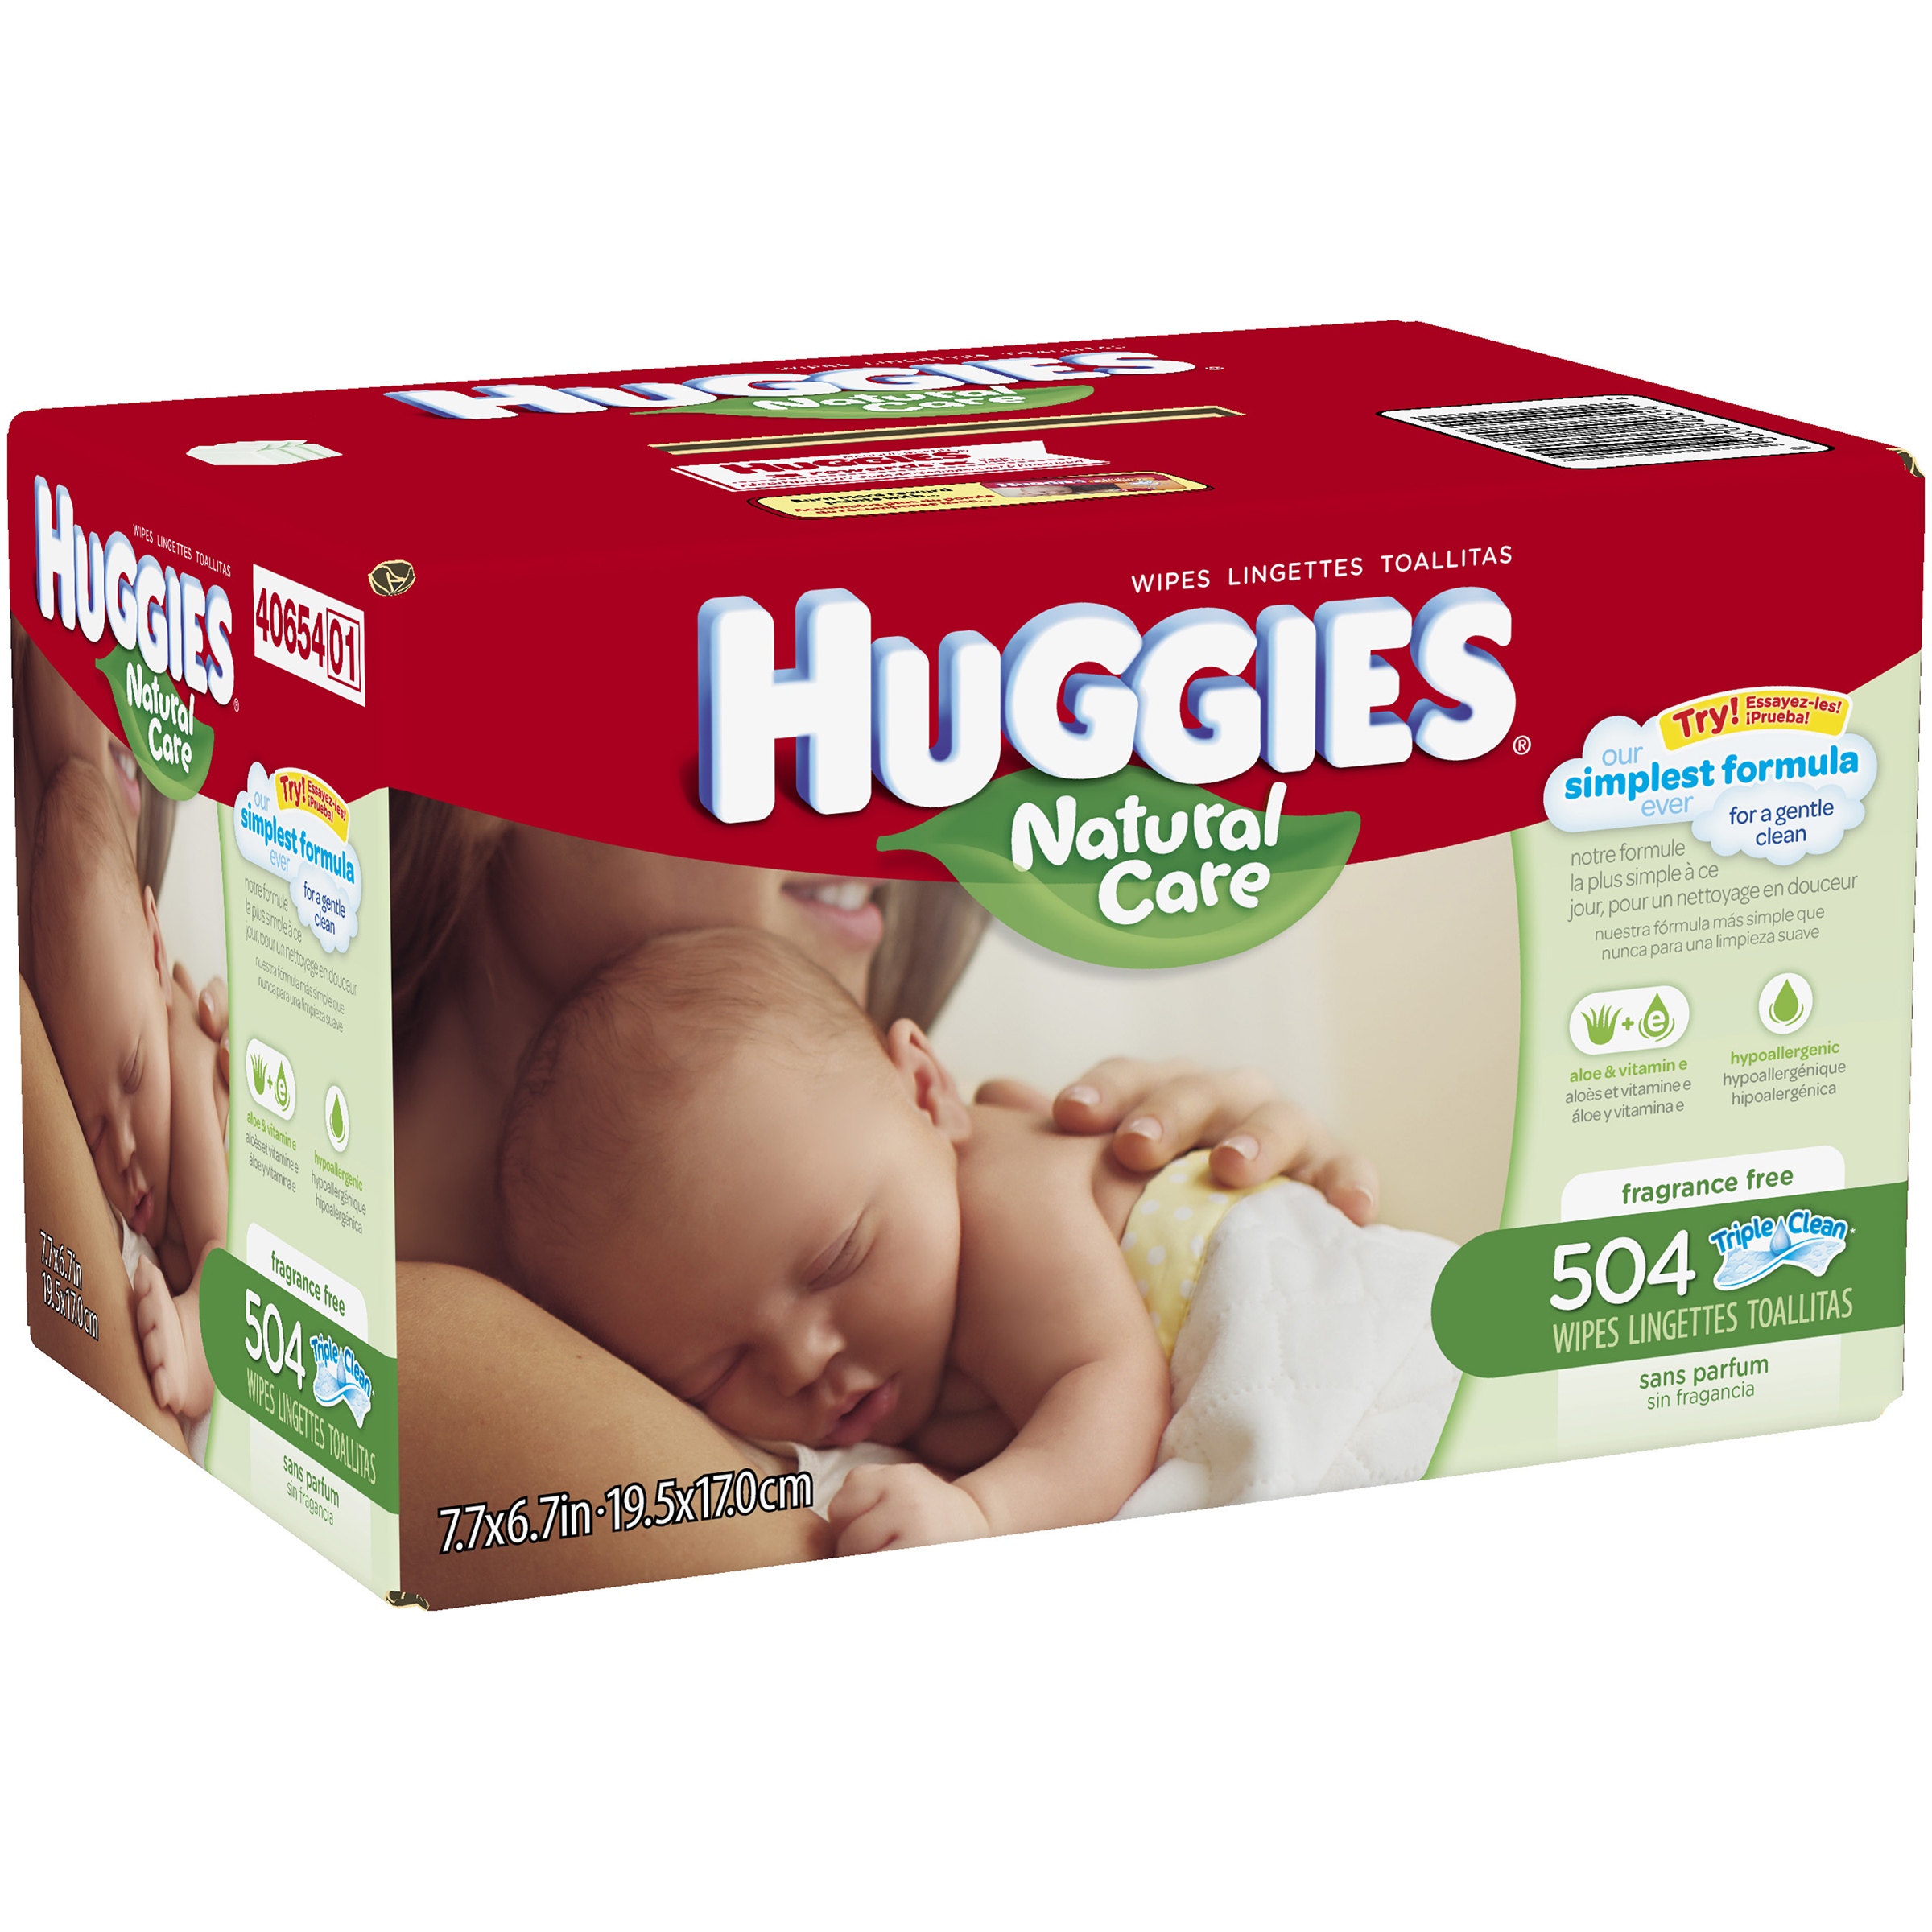 Huggies Natural Care 504 Count - image 2 of 3